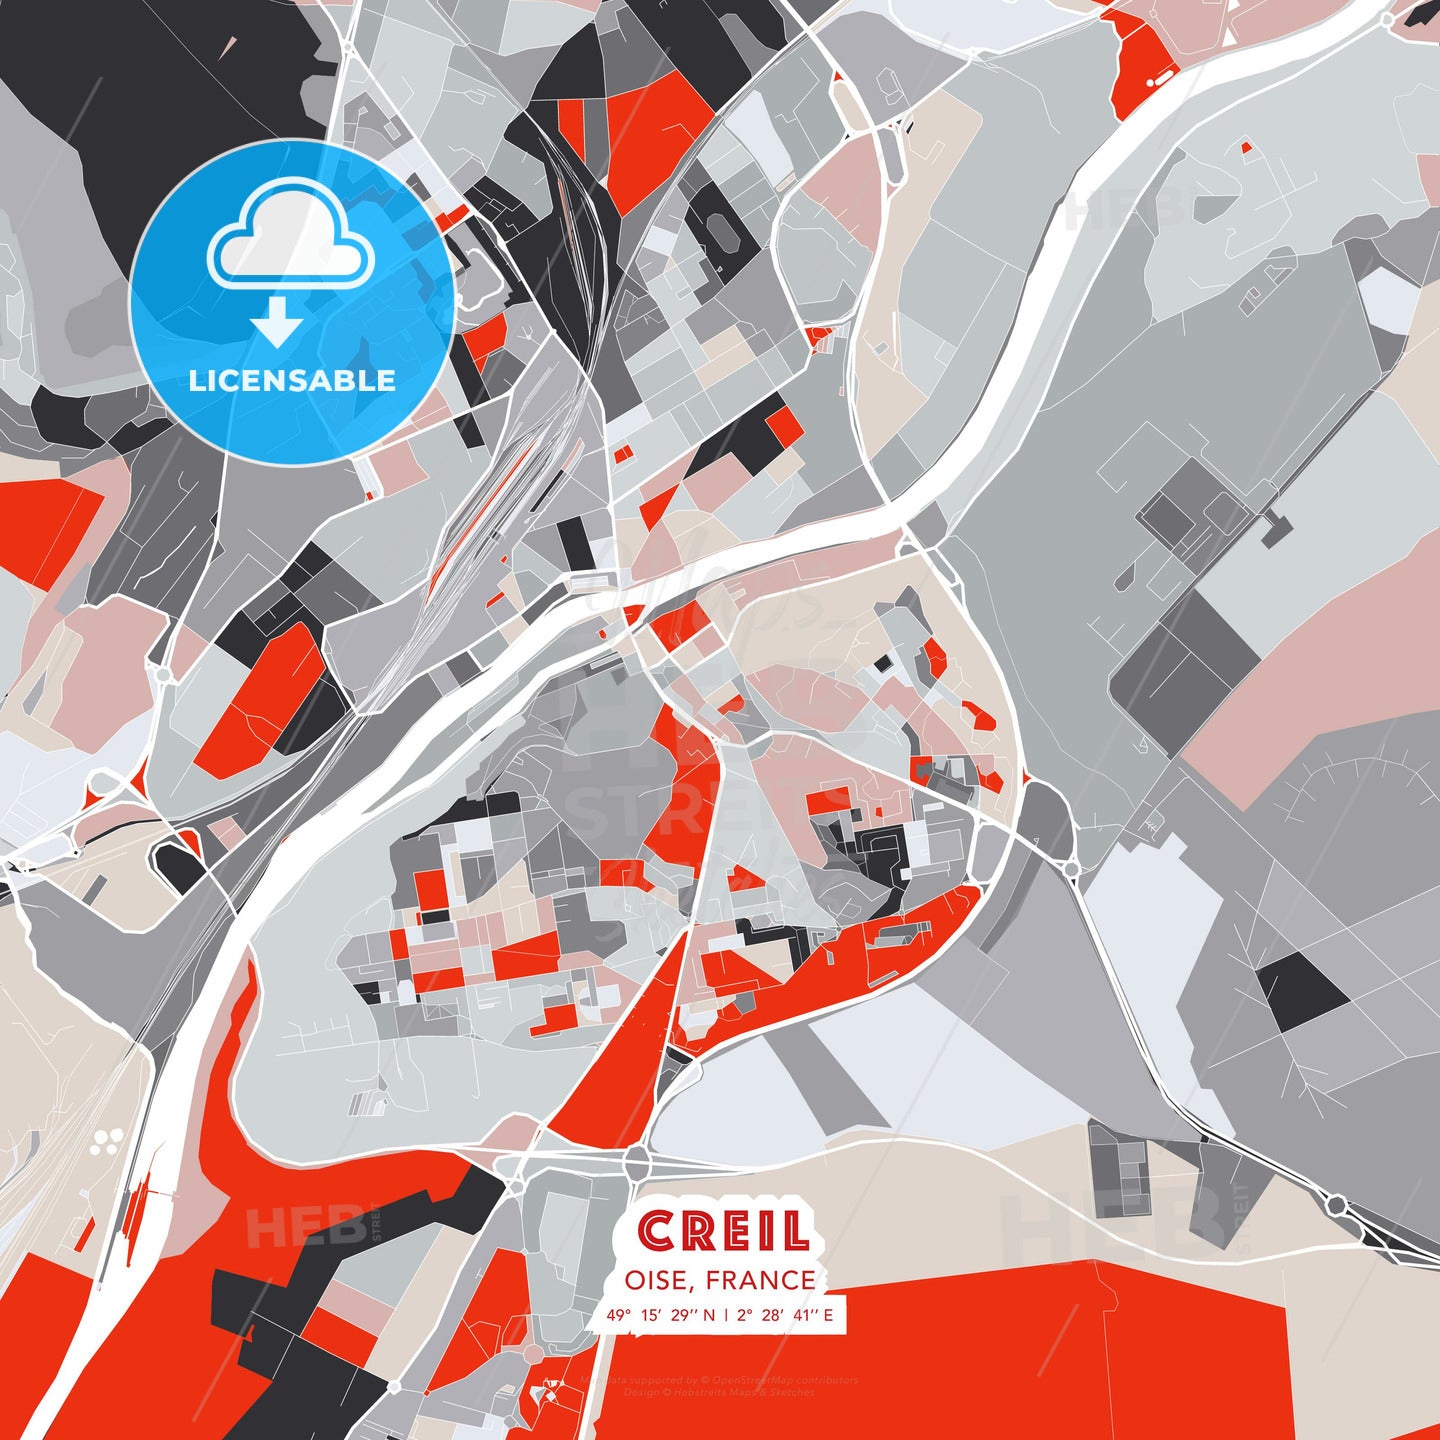 Creil, Oise, France, modern map - HEBSTREITS Sketches